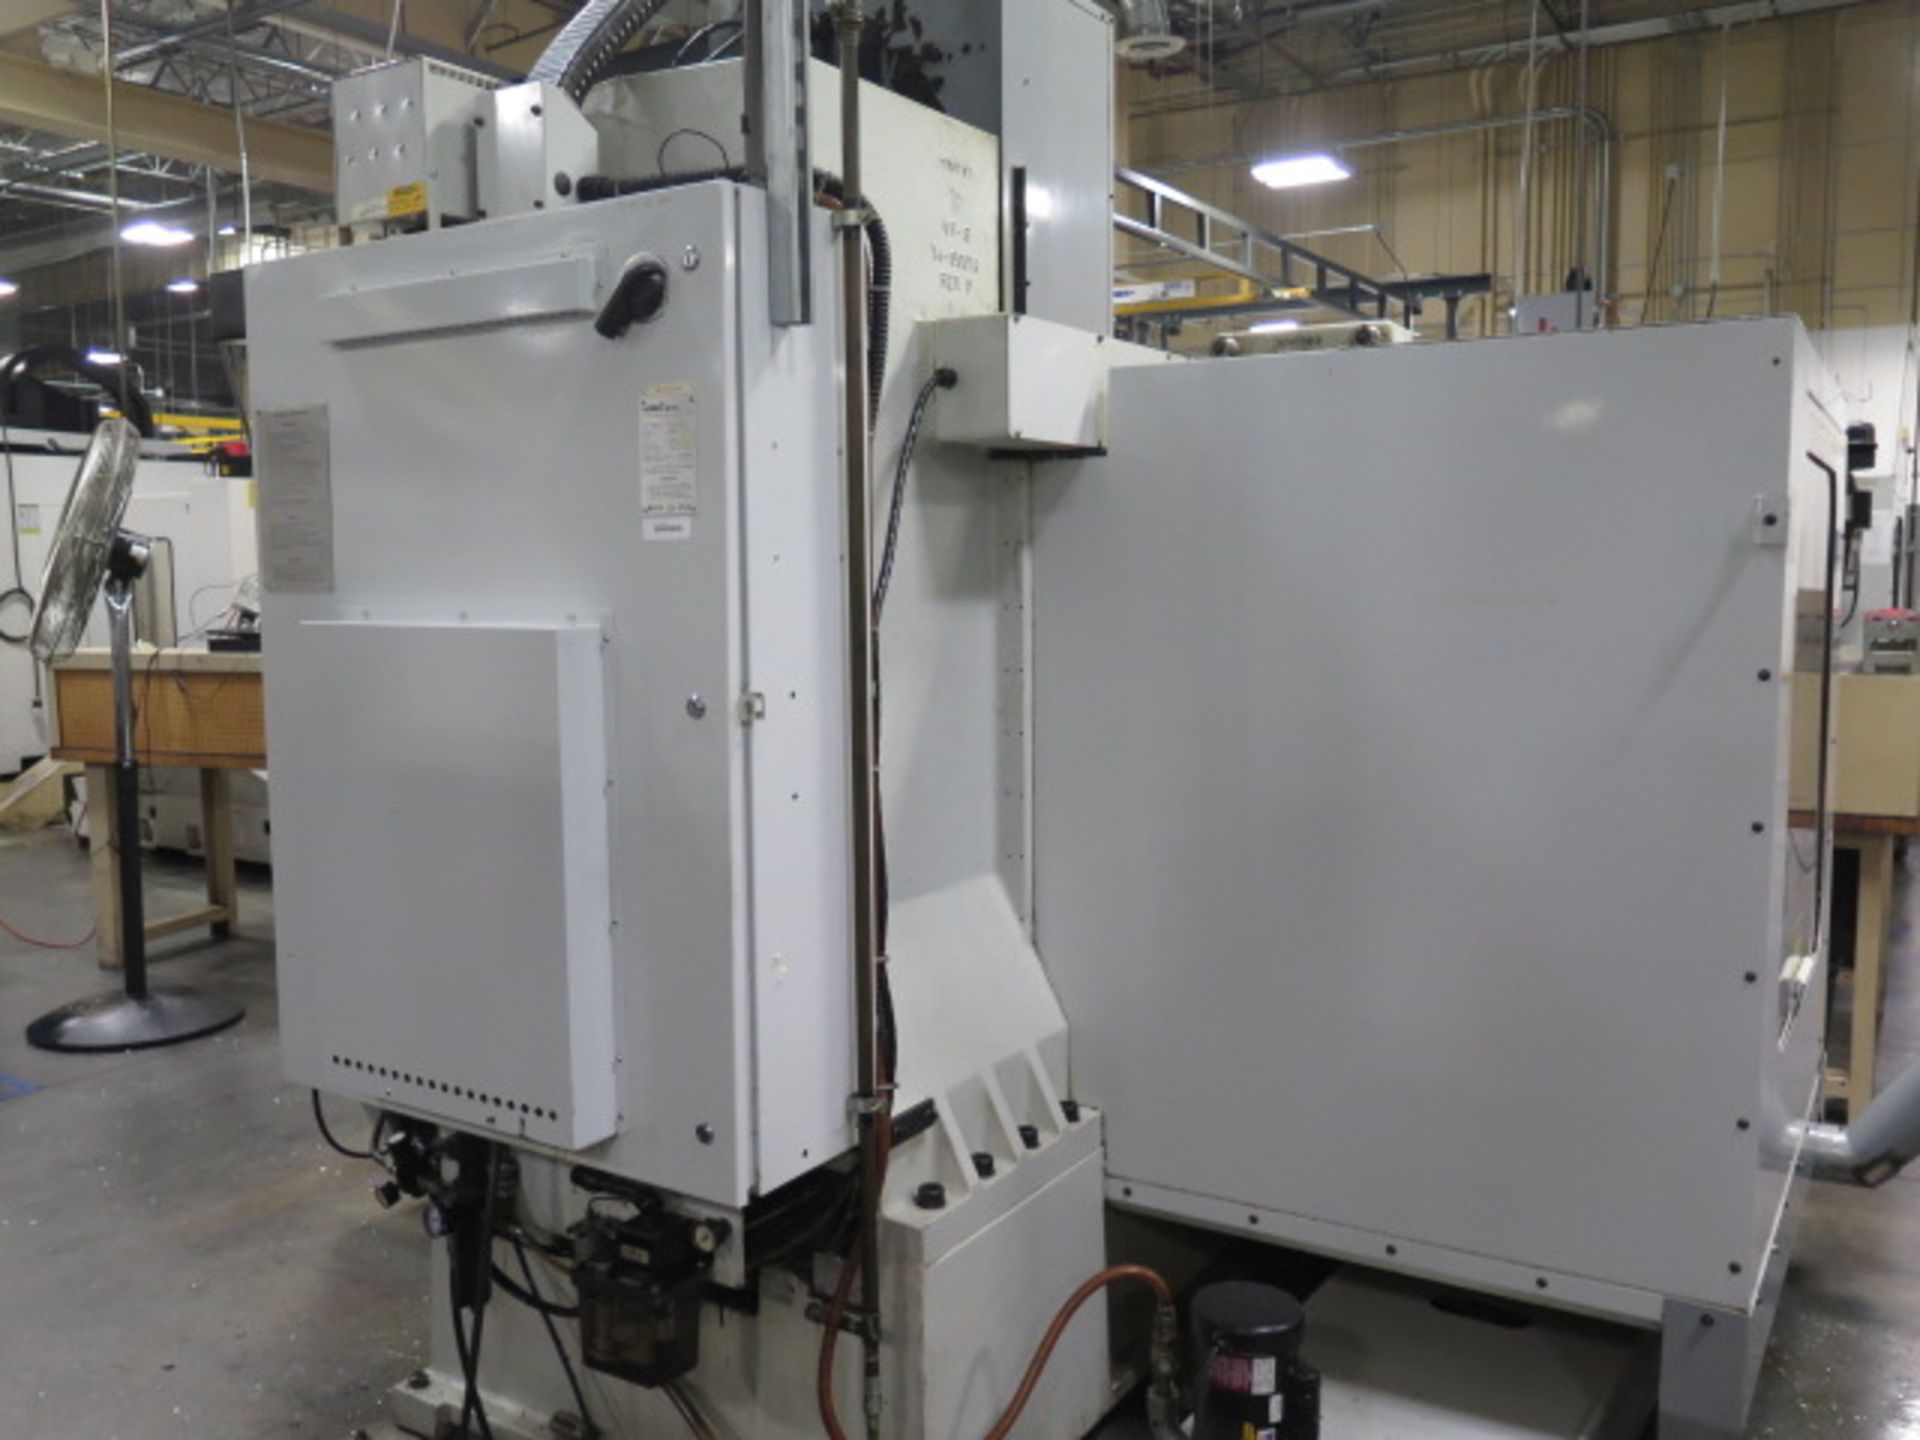 1997 Haas VF-3 4-Axis CNC Vertical Machining Center s/n 10188 w/ Haas Controls, 20-Station ATC, BT- - Image 14 of 18